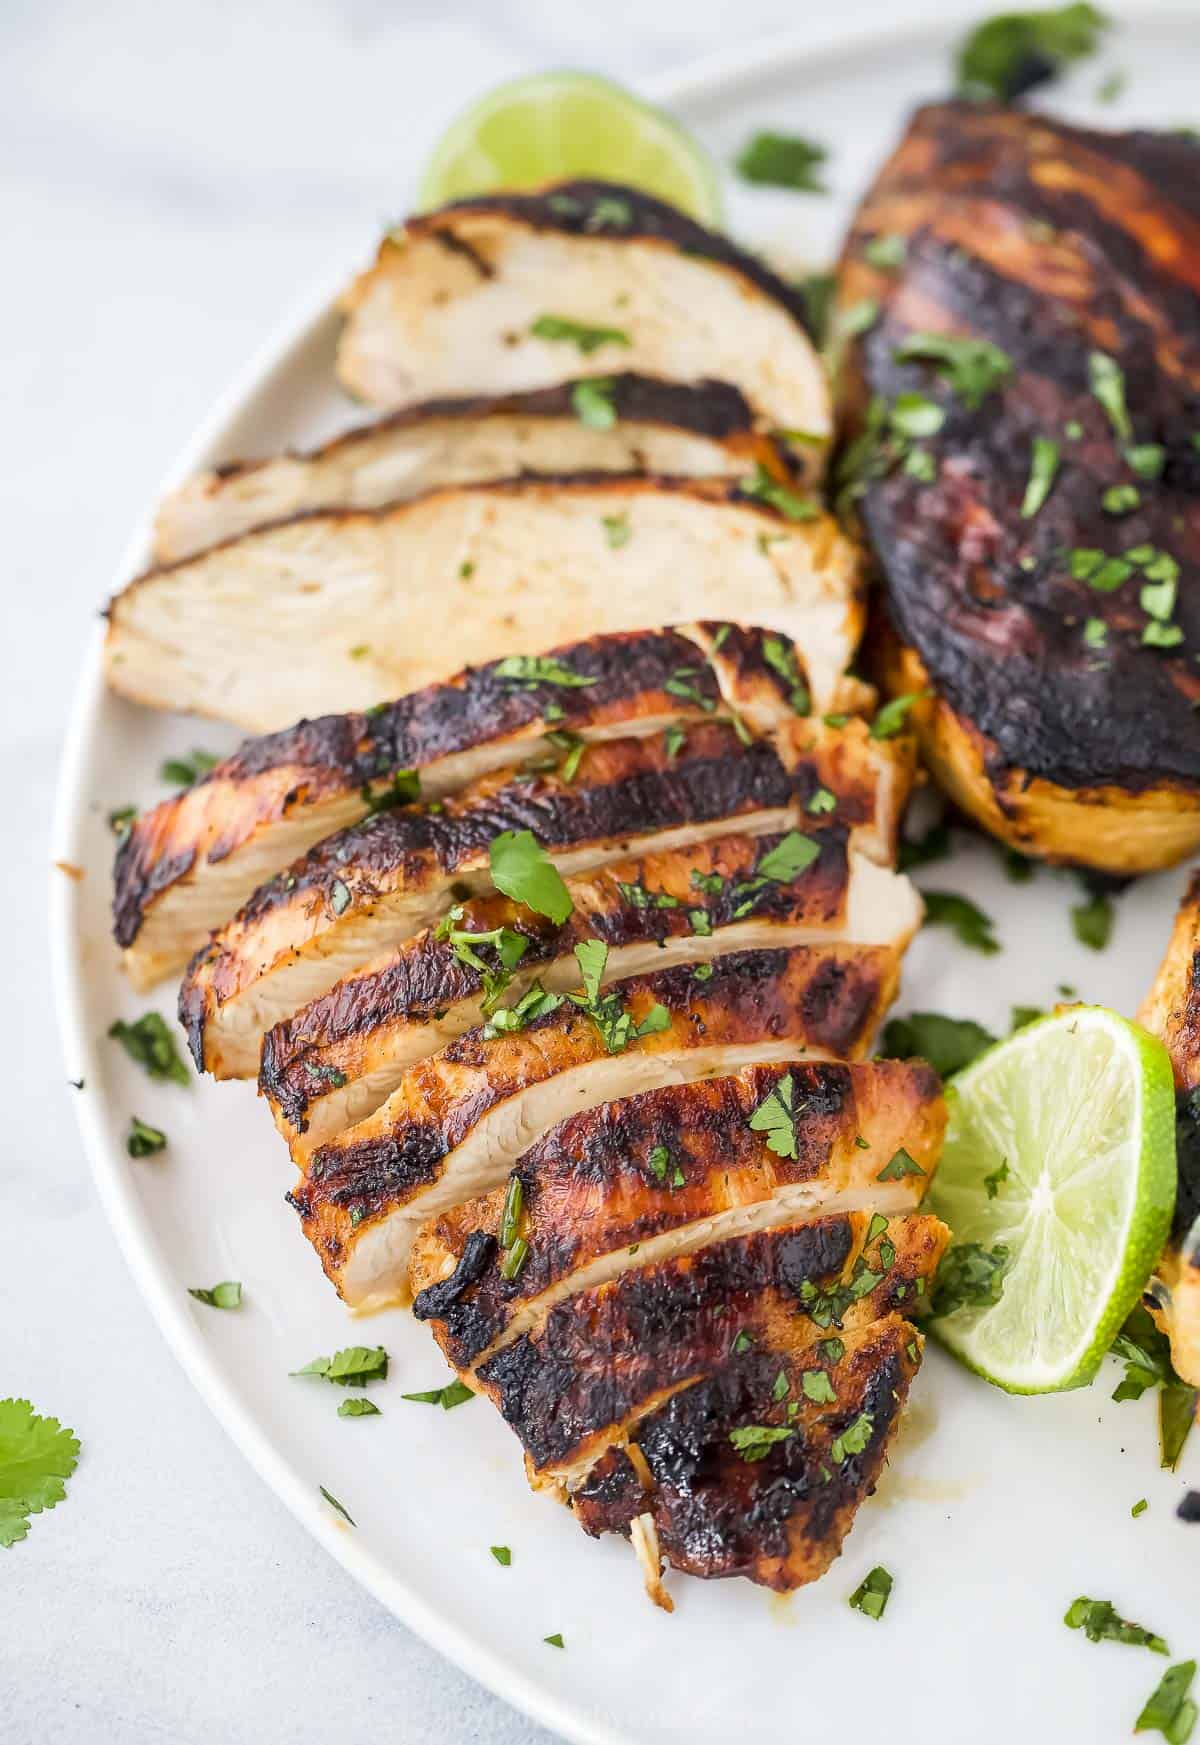 Tequila lime grilled chicken on a plate with chopped parsley sprinkled on top